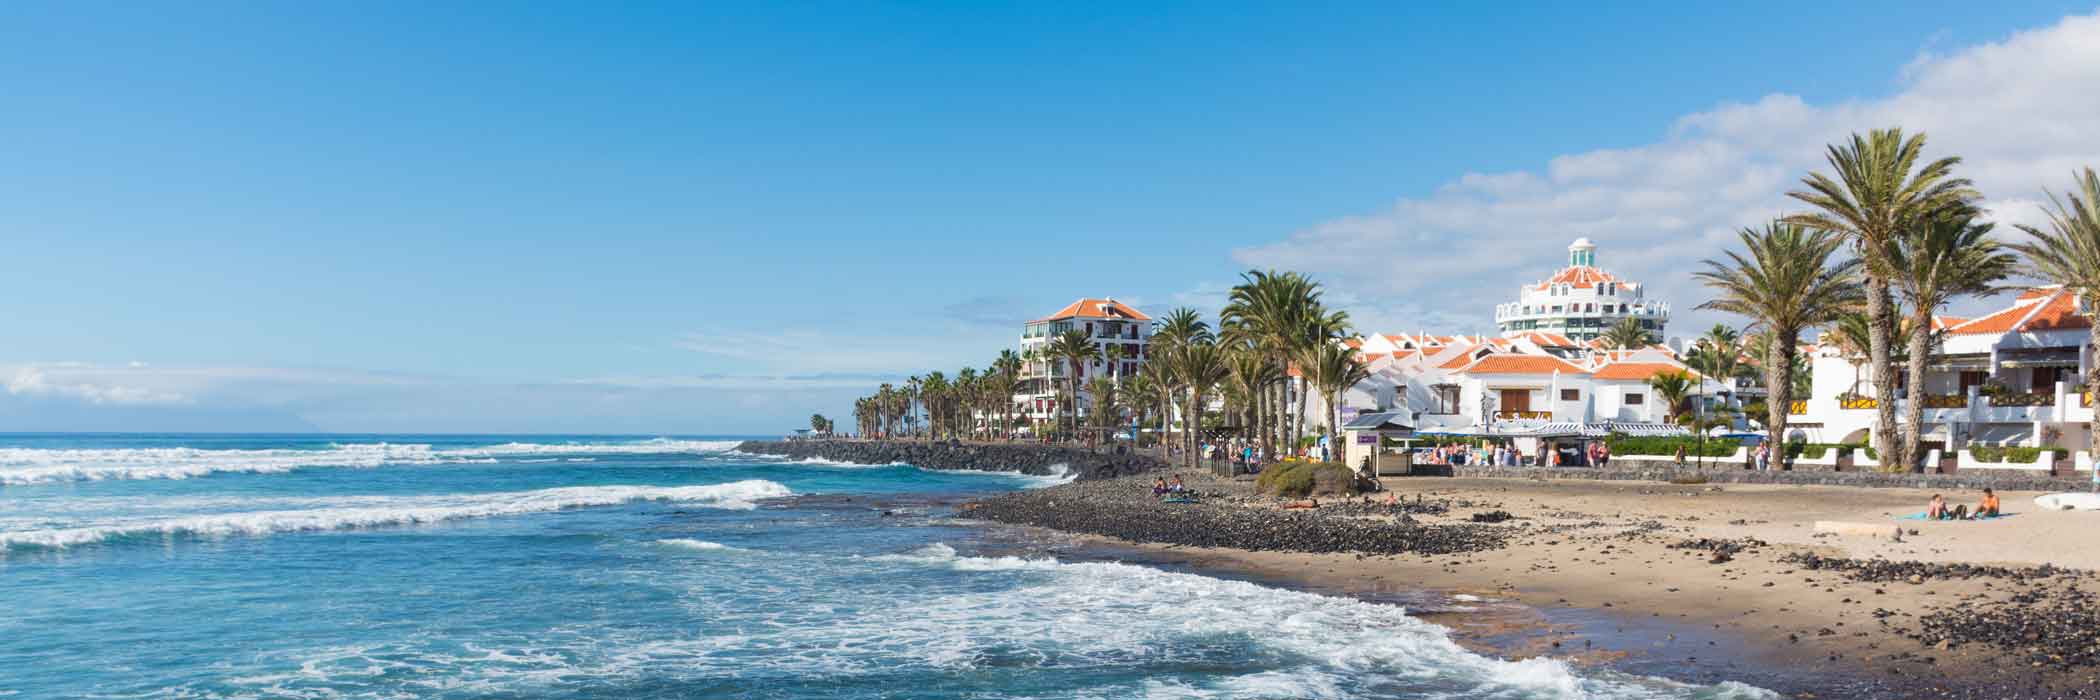 Self Catering holidays in Tenerife